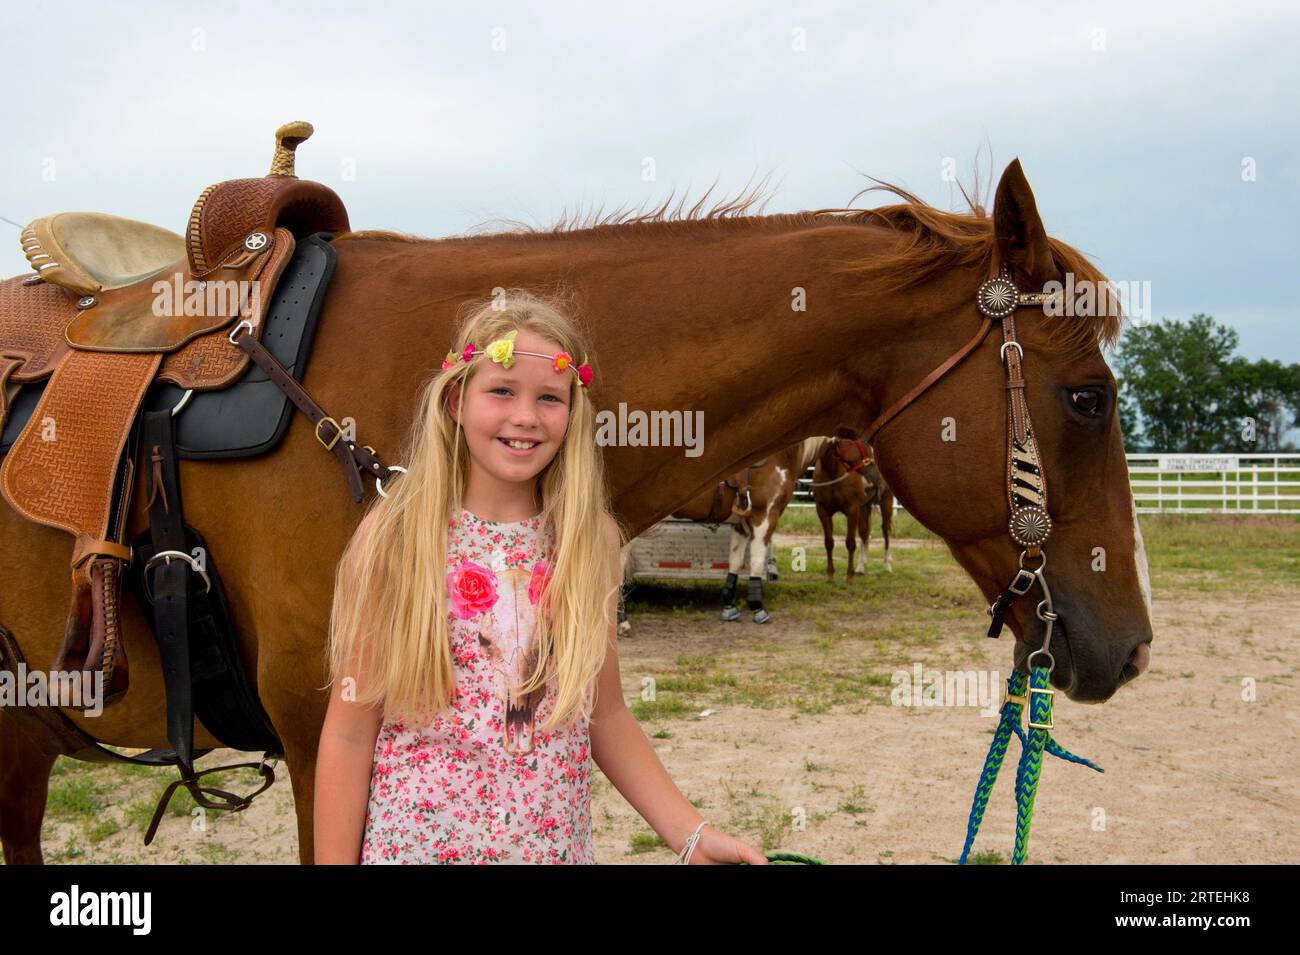 Pre-adolescent girl stands next to her horse; Burwell, Nebraska, United States of America Stock Photo